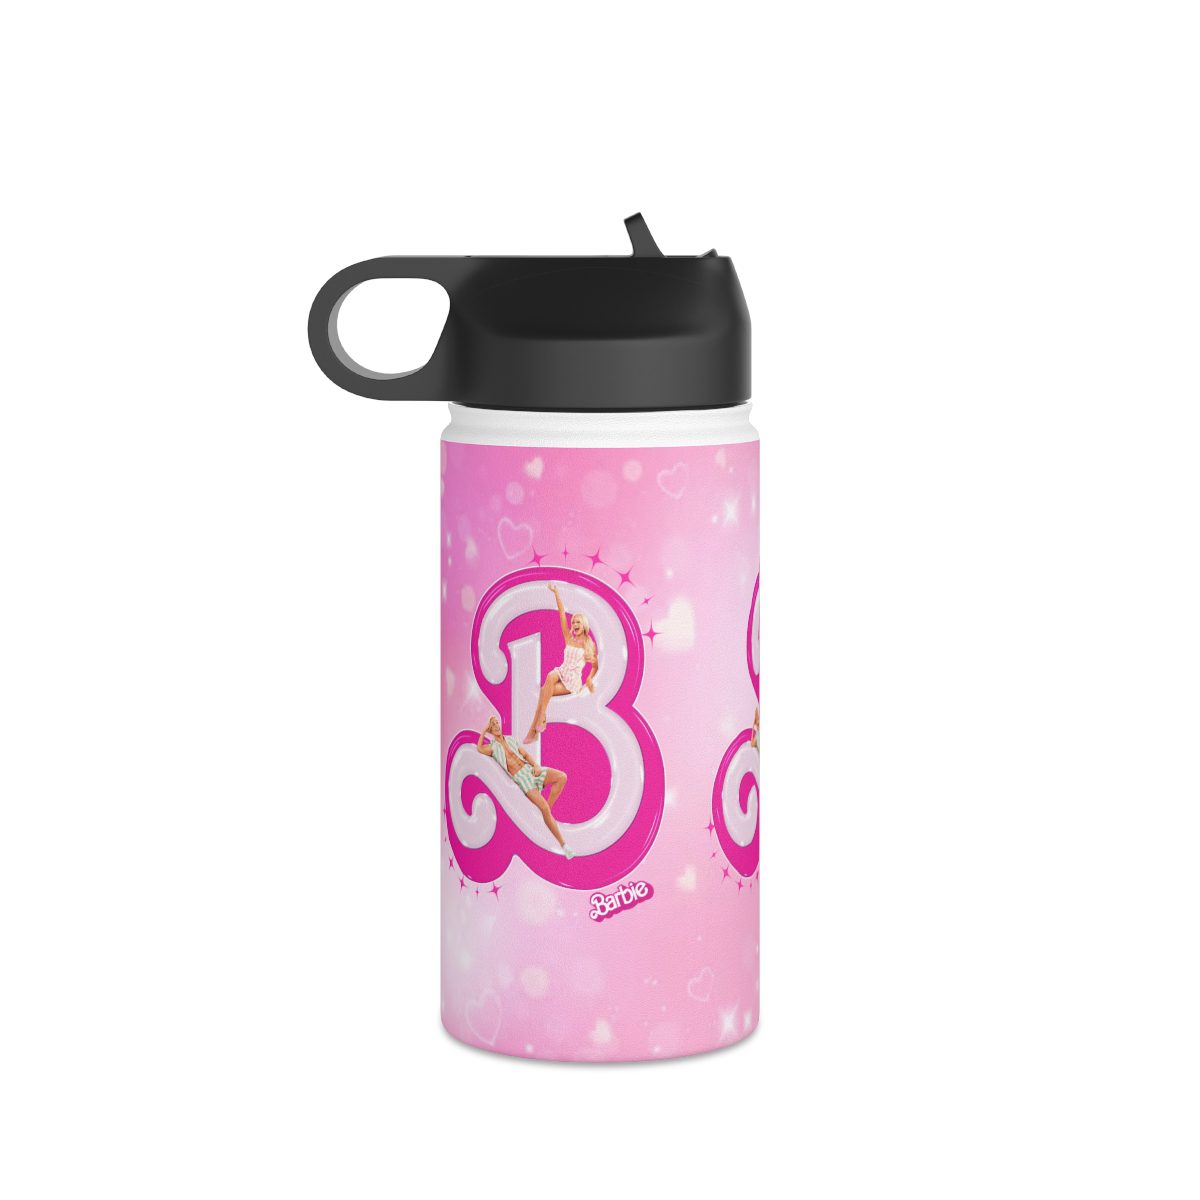 Barbie Movie 2023 Insulated Stainless Steel Water Bottle Cool Kiddo 14